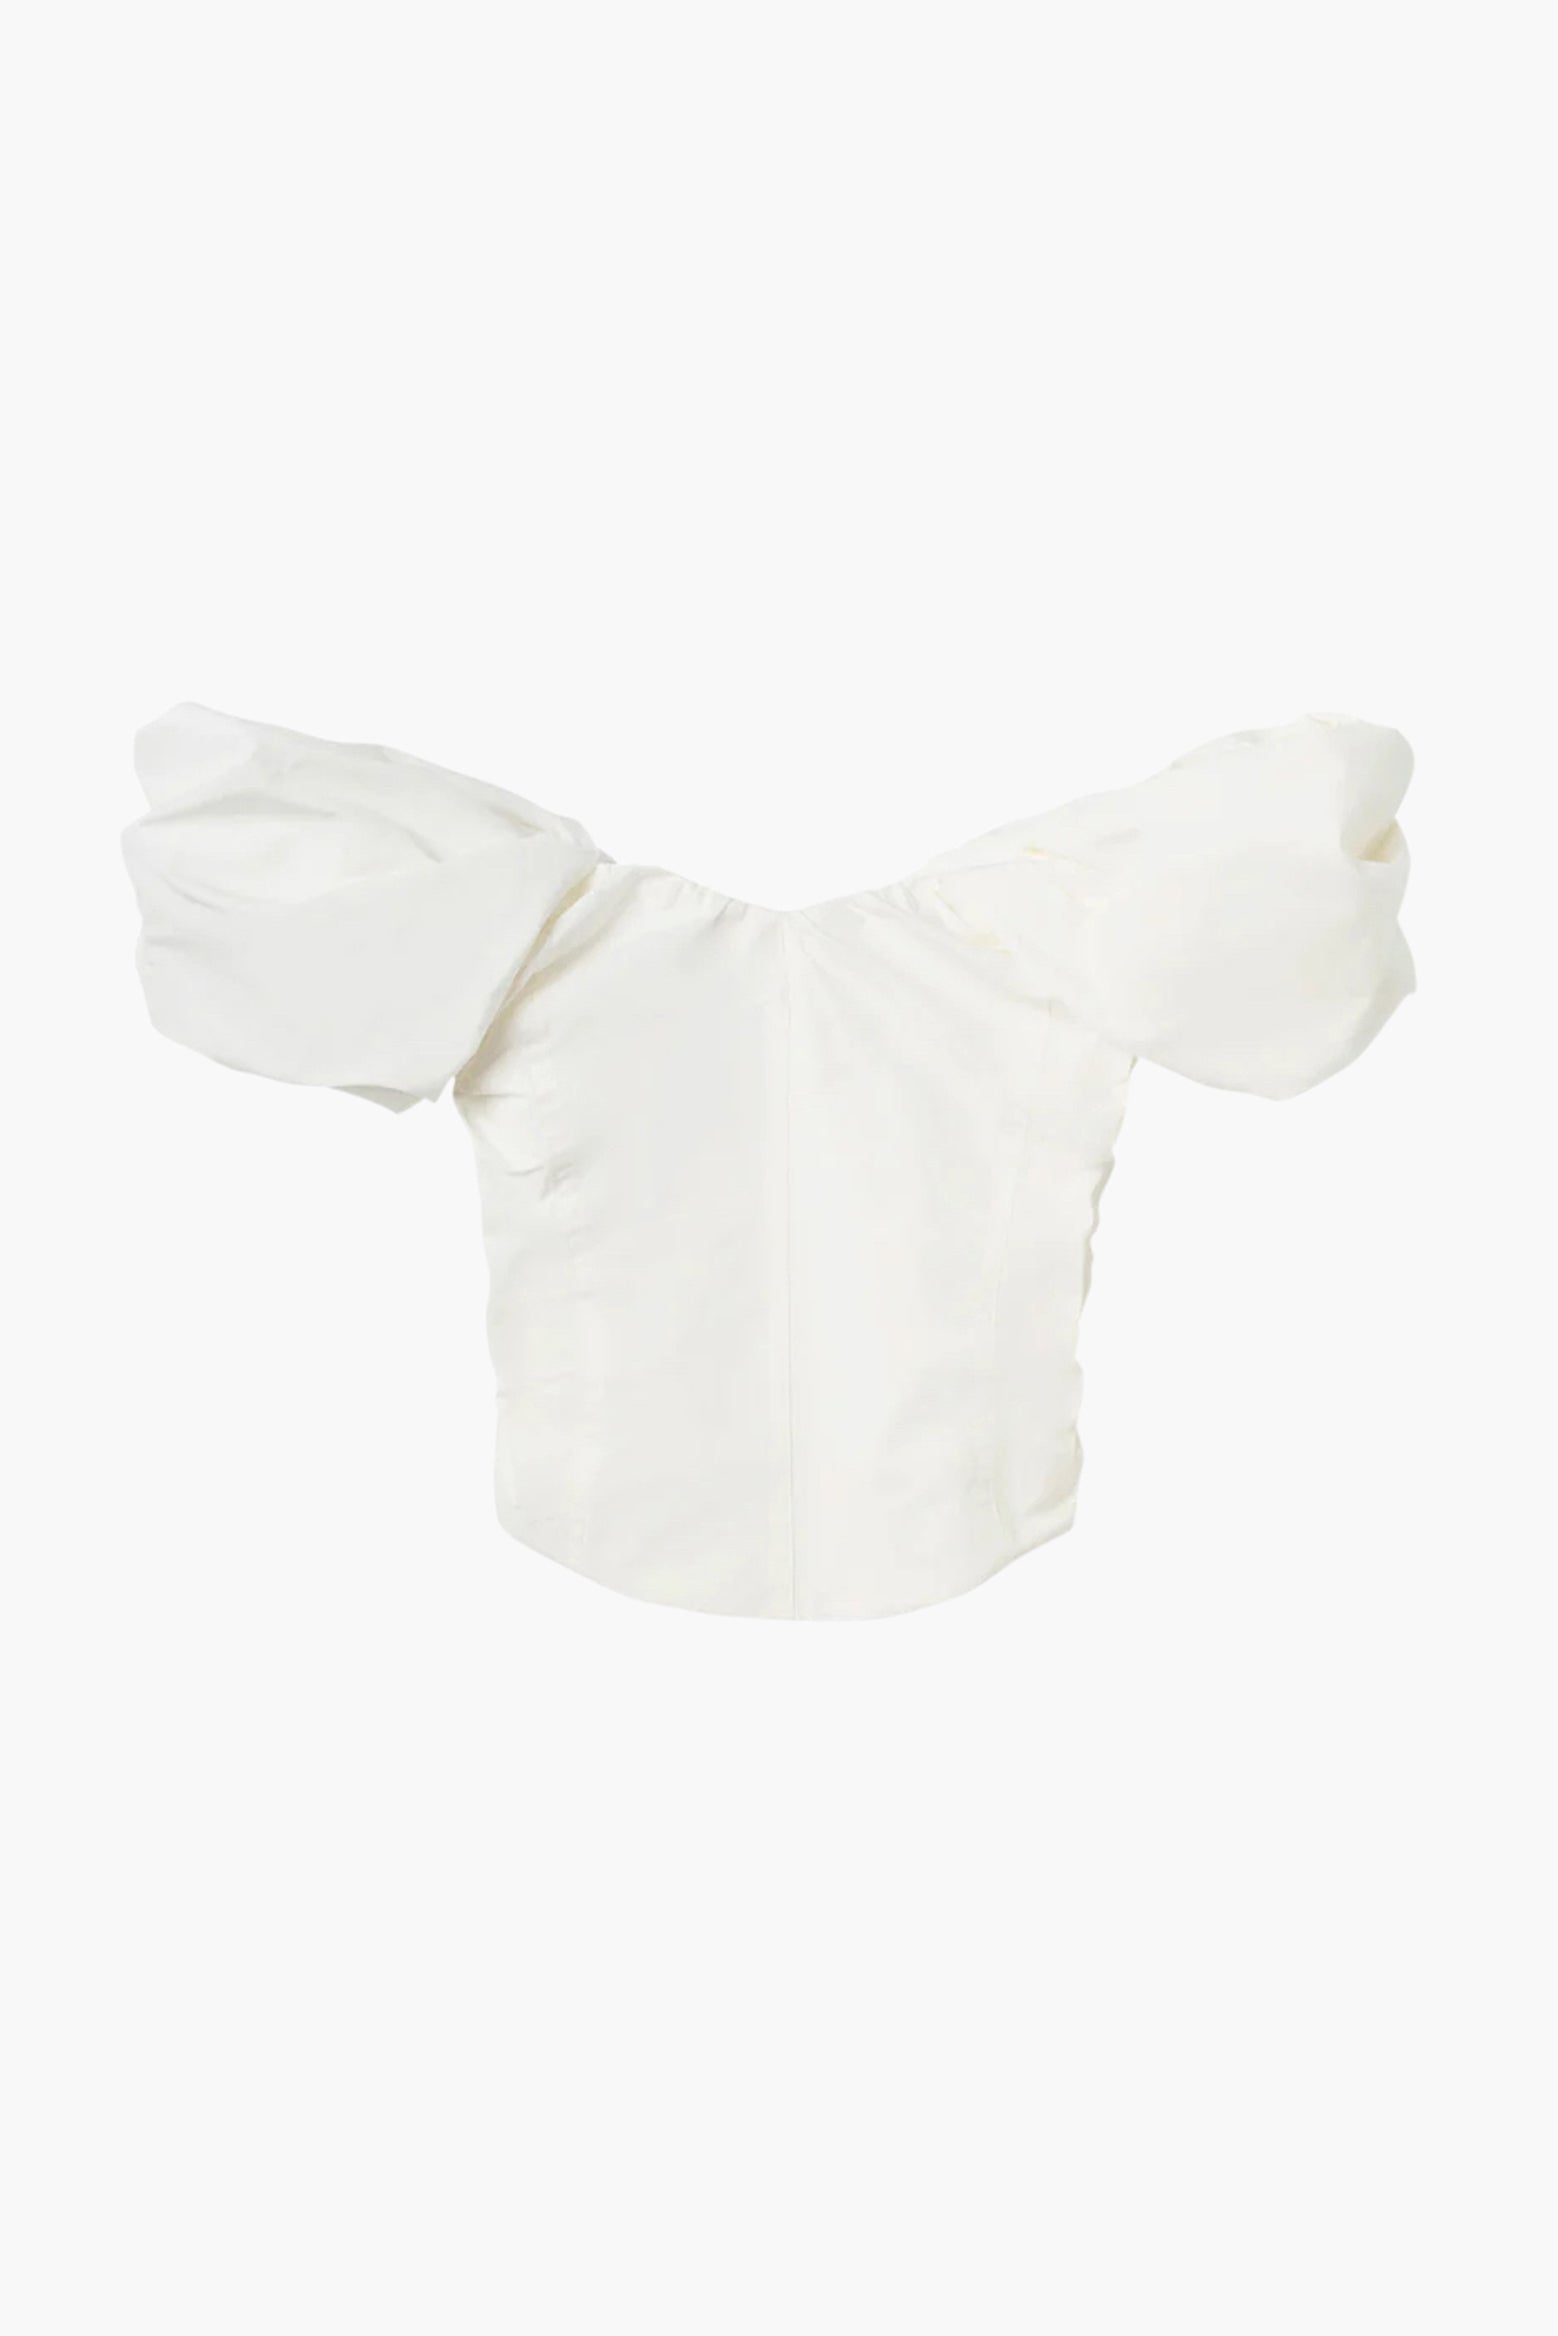 The ALC Nora Top in white available at The New Trend Australia